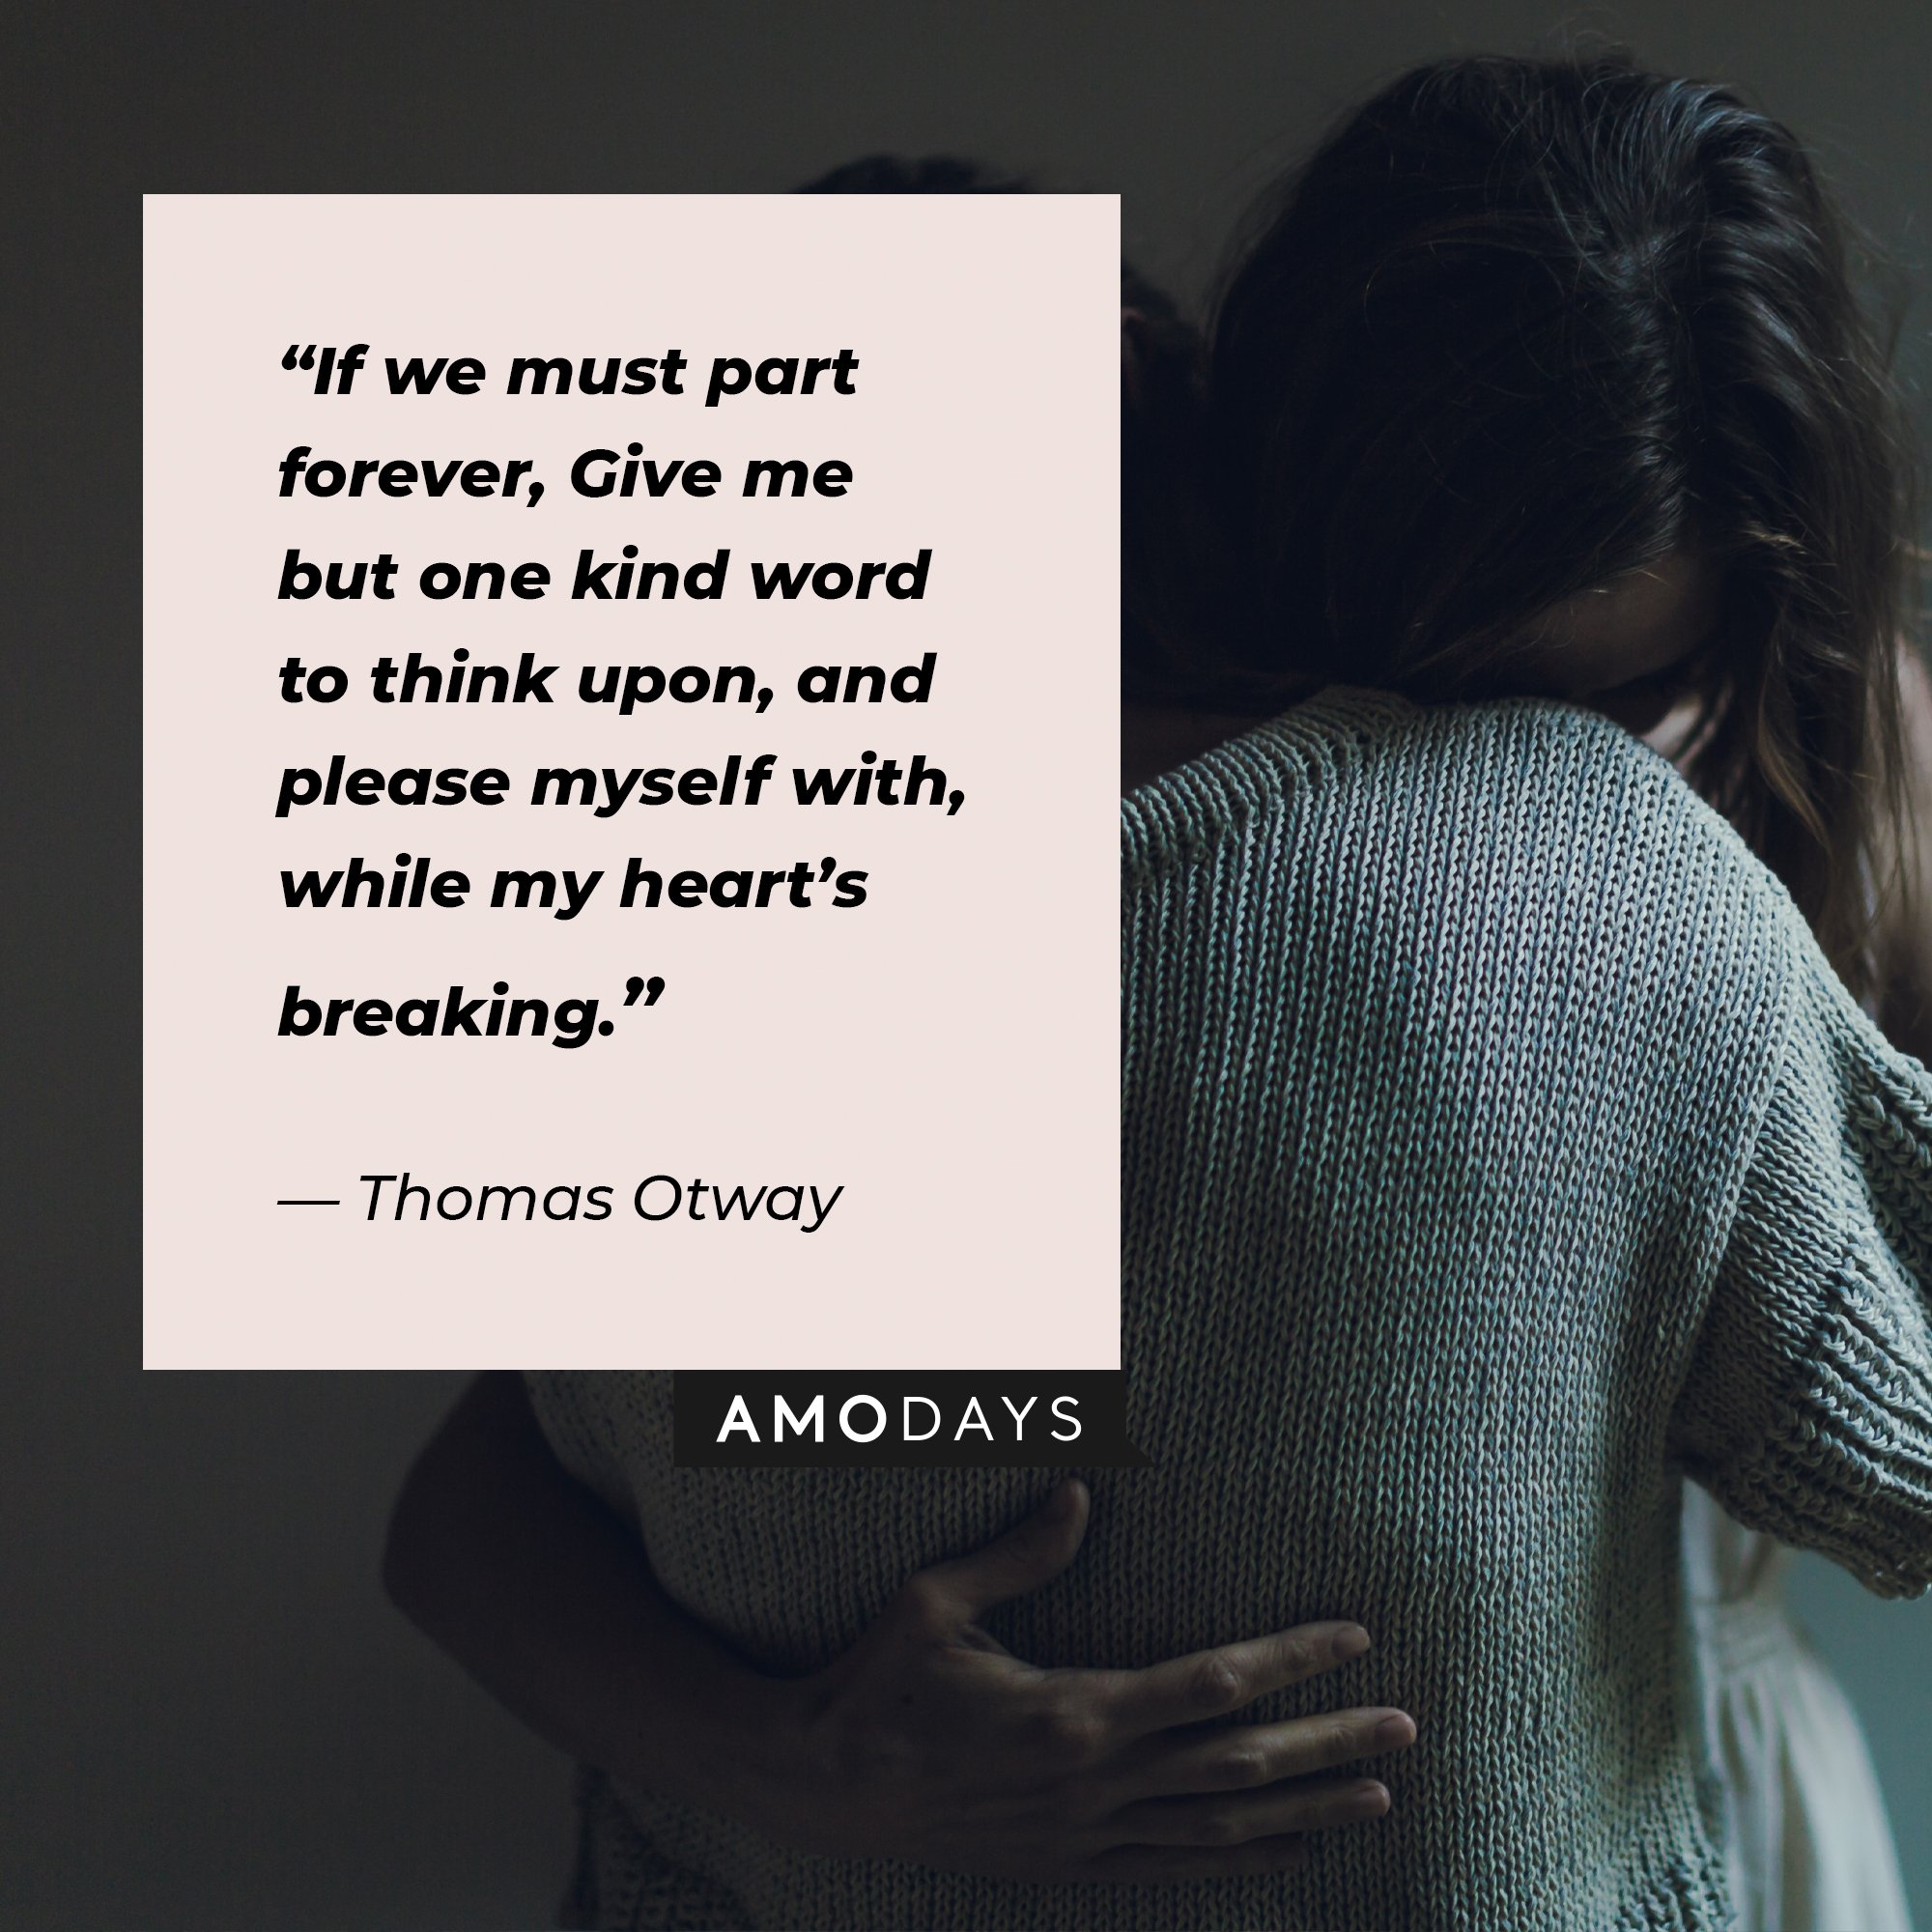 Thomas Otway’s quote:“If we must part forever, Give me but one kind word to think upon, and please myself with, while my heart’s breaking. | Image: AmoDays